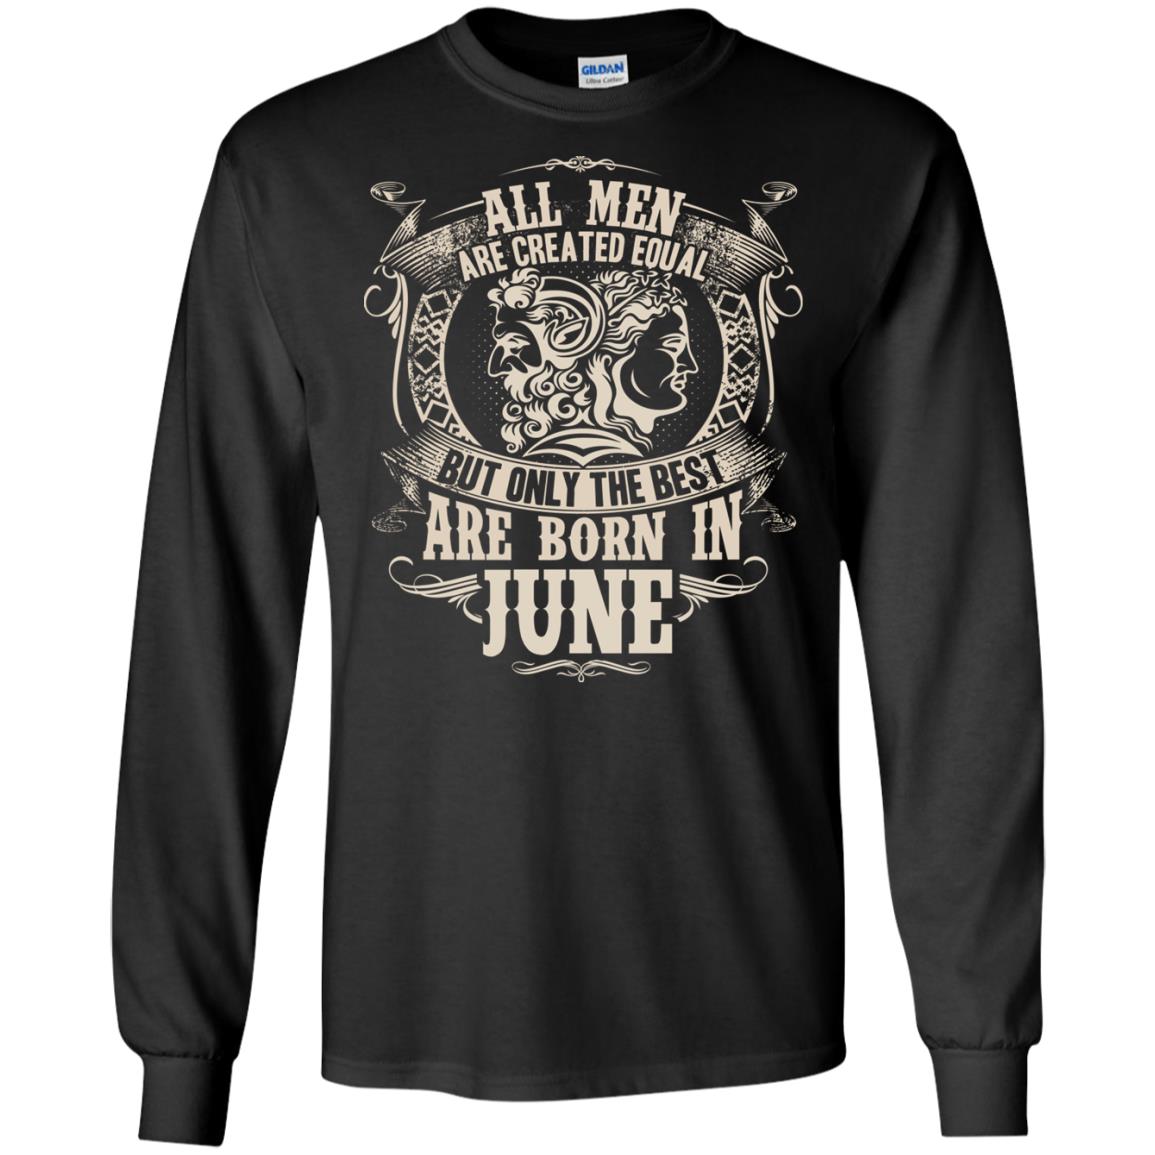 All Men Are Created Equal, But Only The Best Are Born In June T-shirtG240 Gildan LS Ultra Cotton T-Shirt